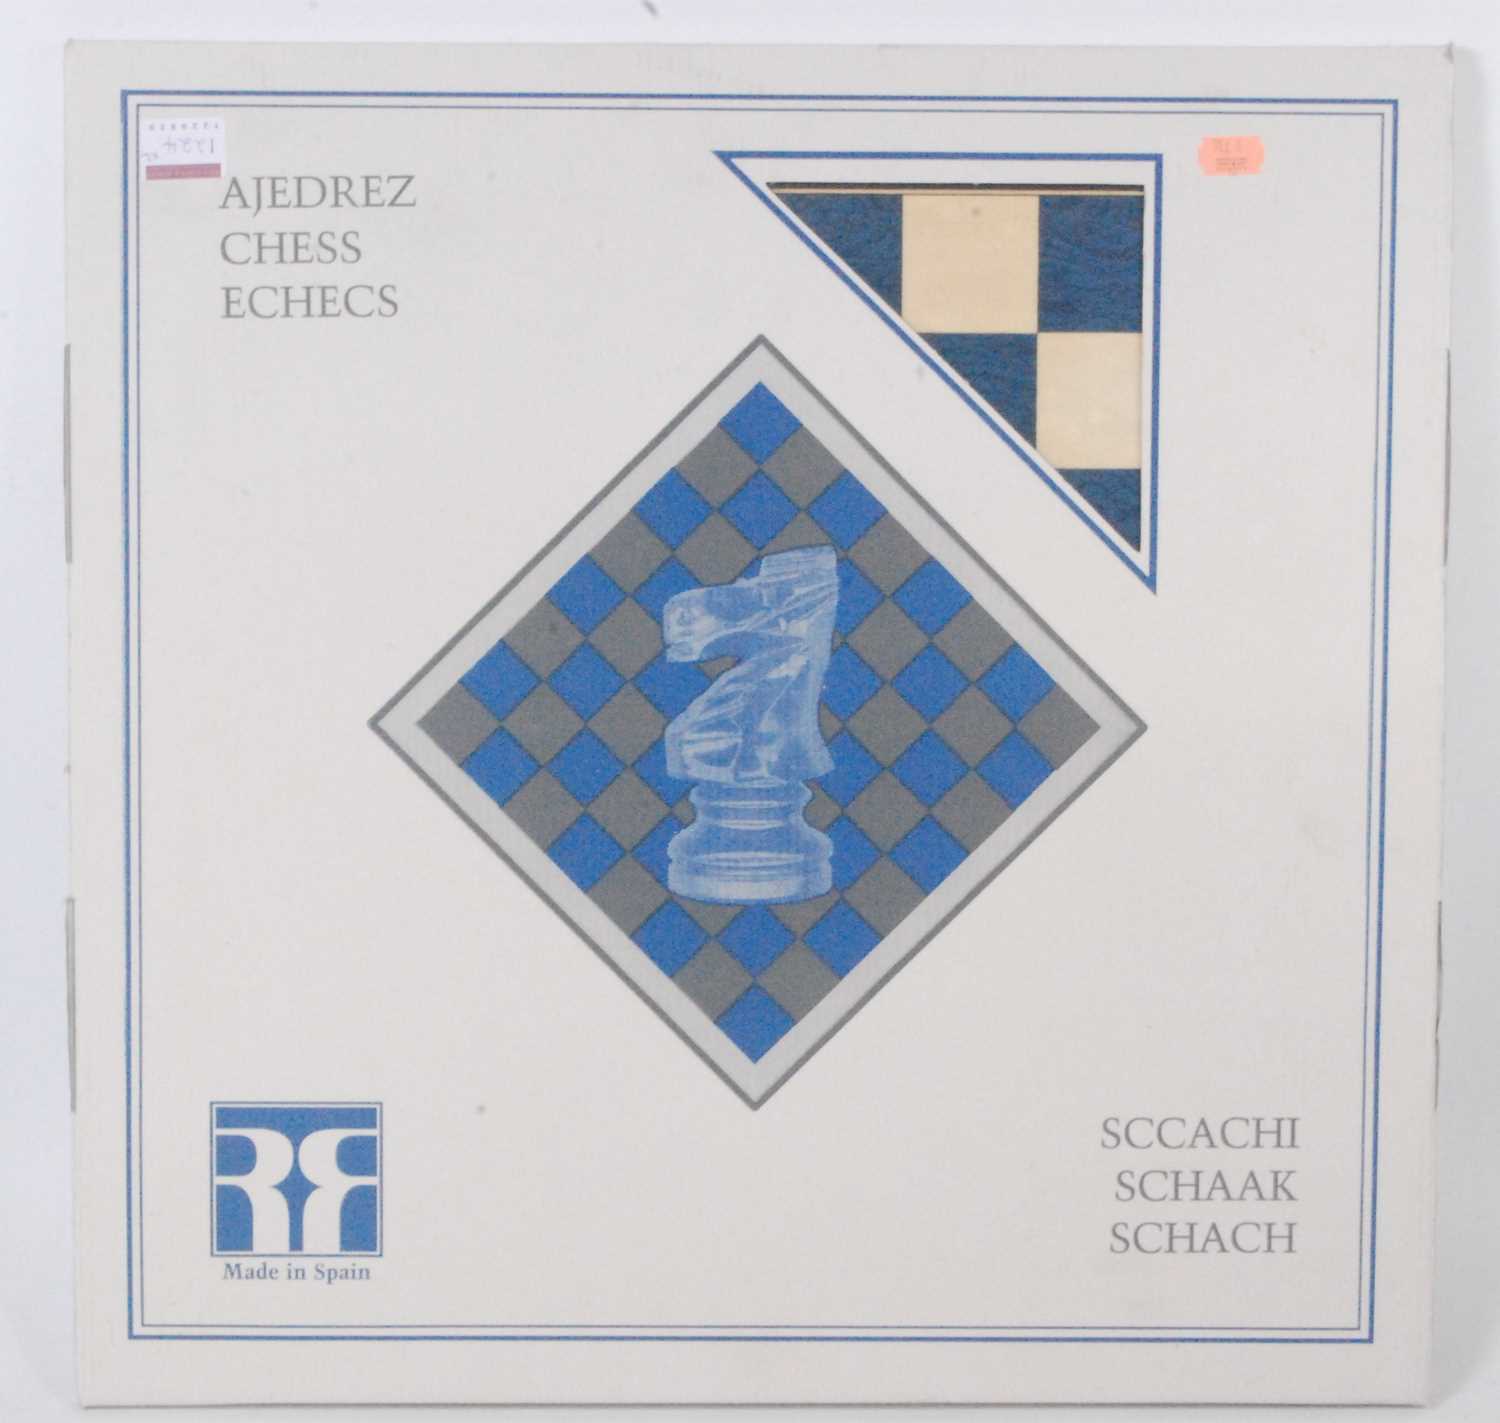 A Studio Anne Carlton Diamond Jubilee commemorative gift set, together with matching chessboard, - Image 2 of 2